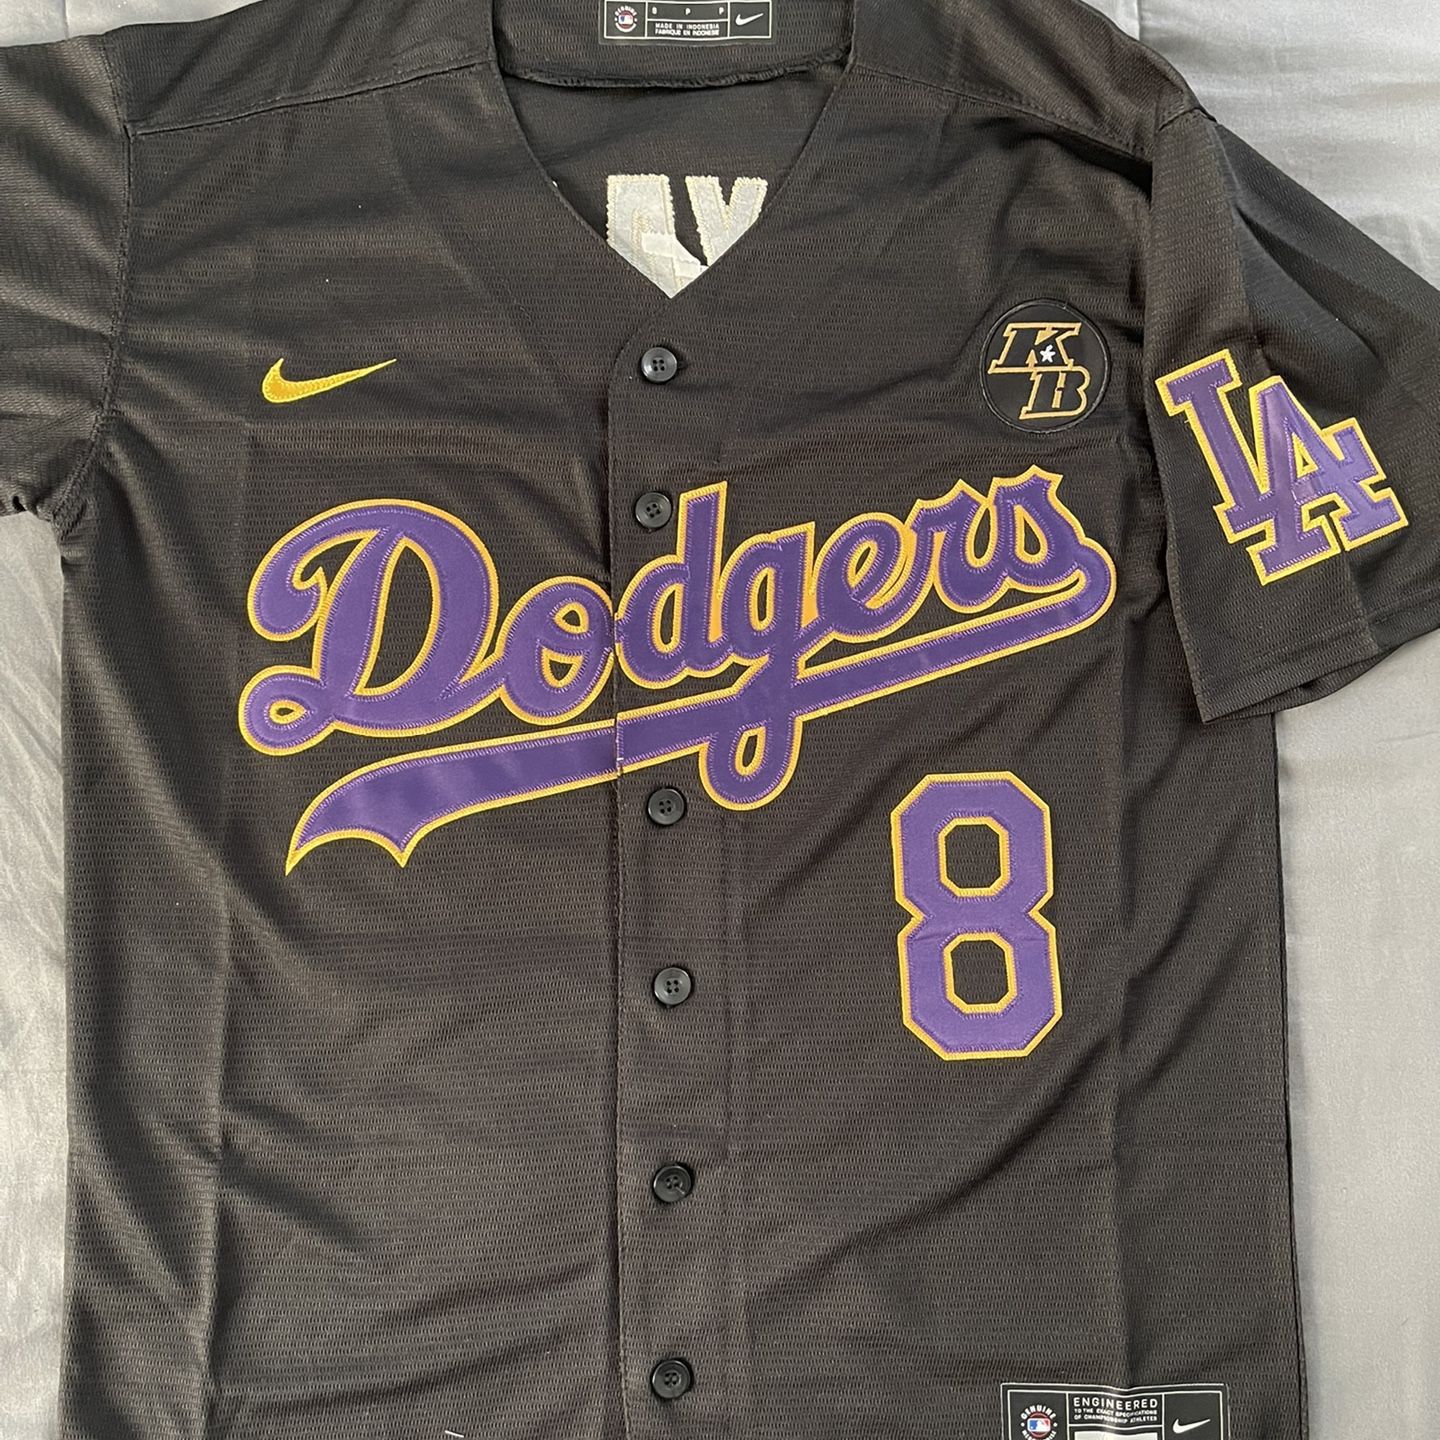 DODGERS BRAVES LAKERS NIGHT KOBE JERSEY!! for Sale in Anaheim, CA